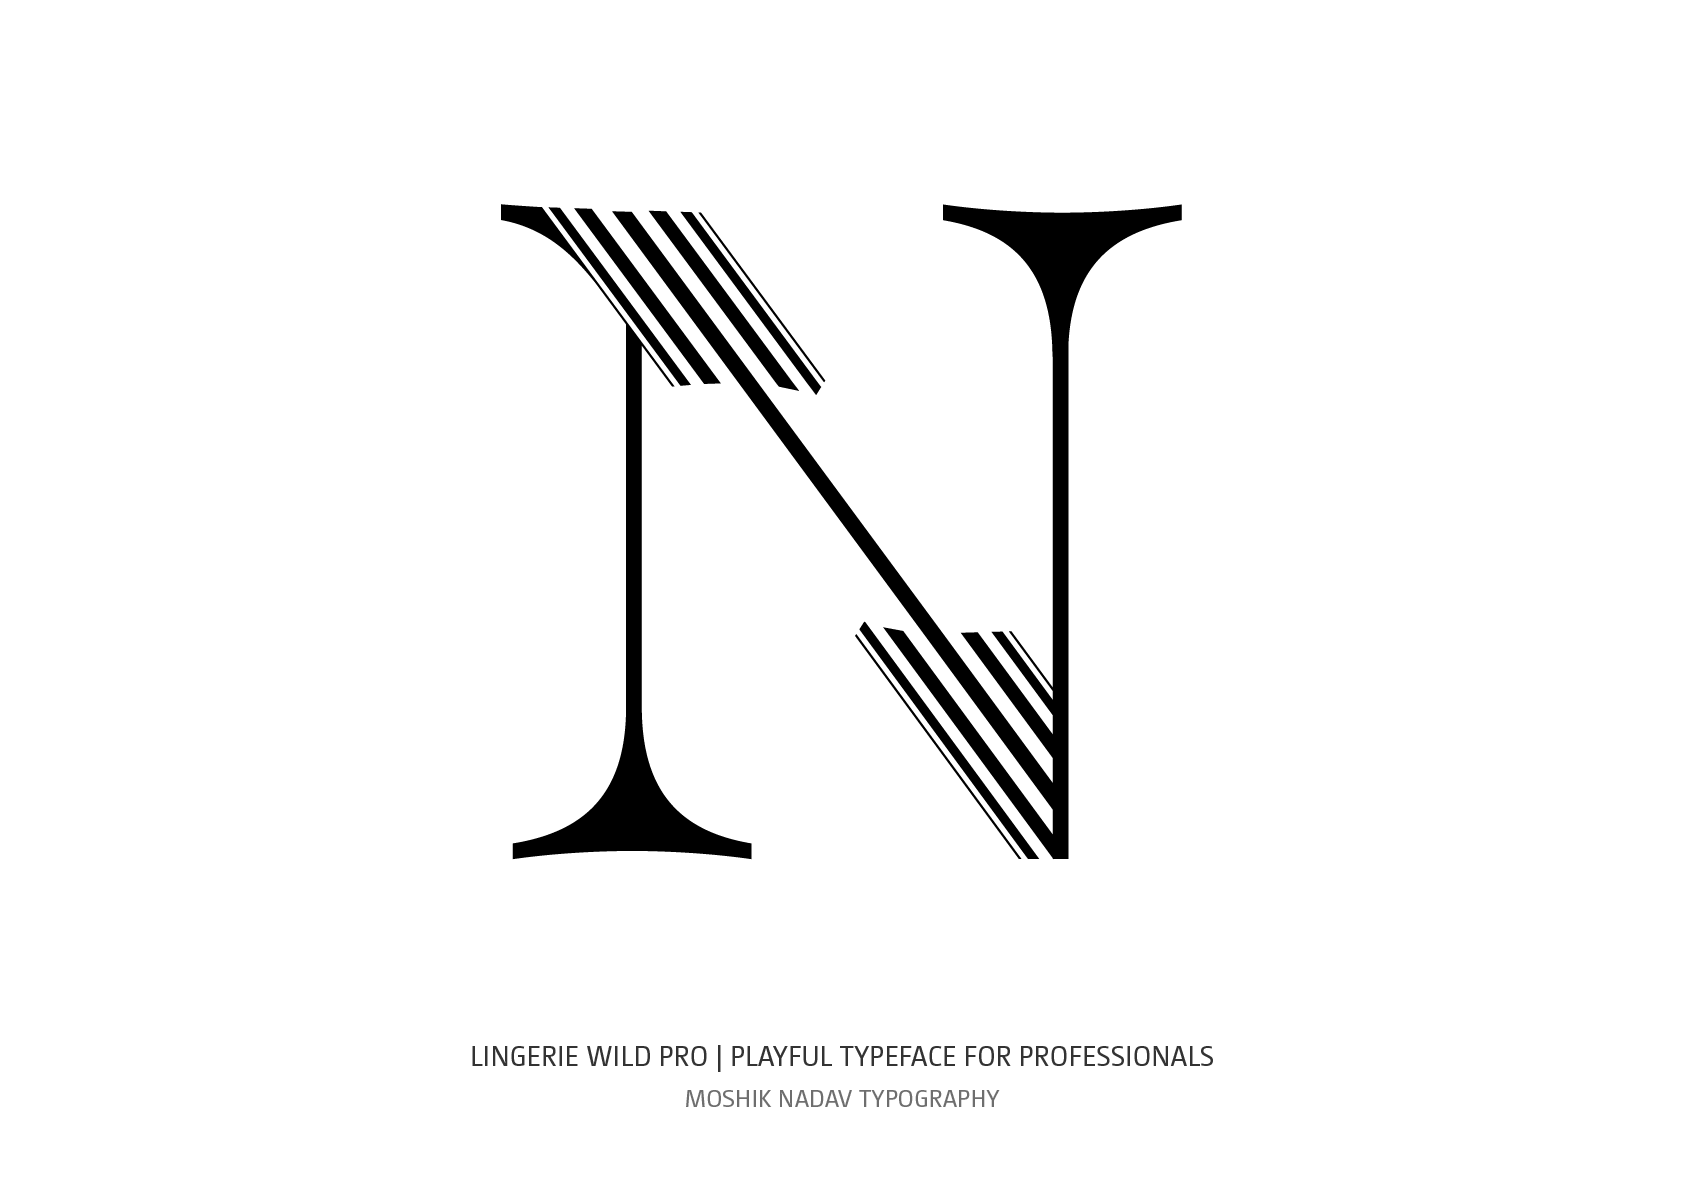 Super sexy uppercase N designed with Lingerie Wild Pro font for fashion and luxury